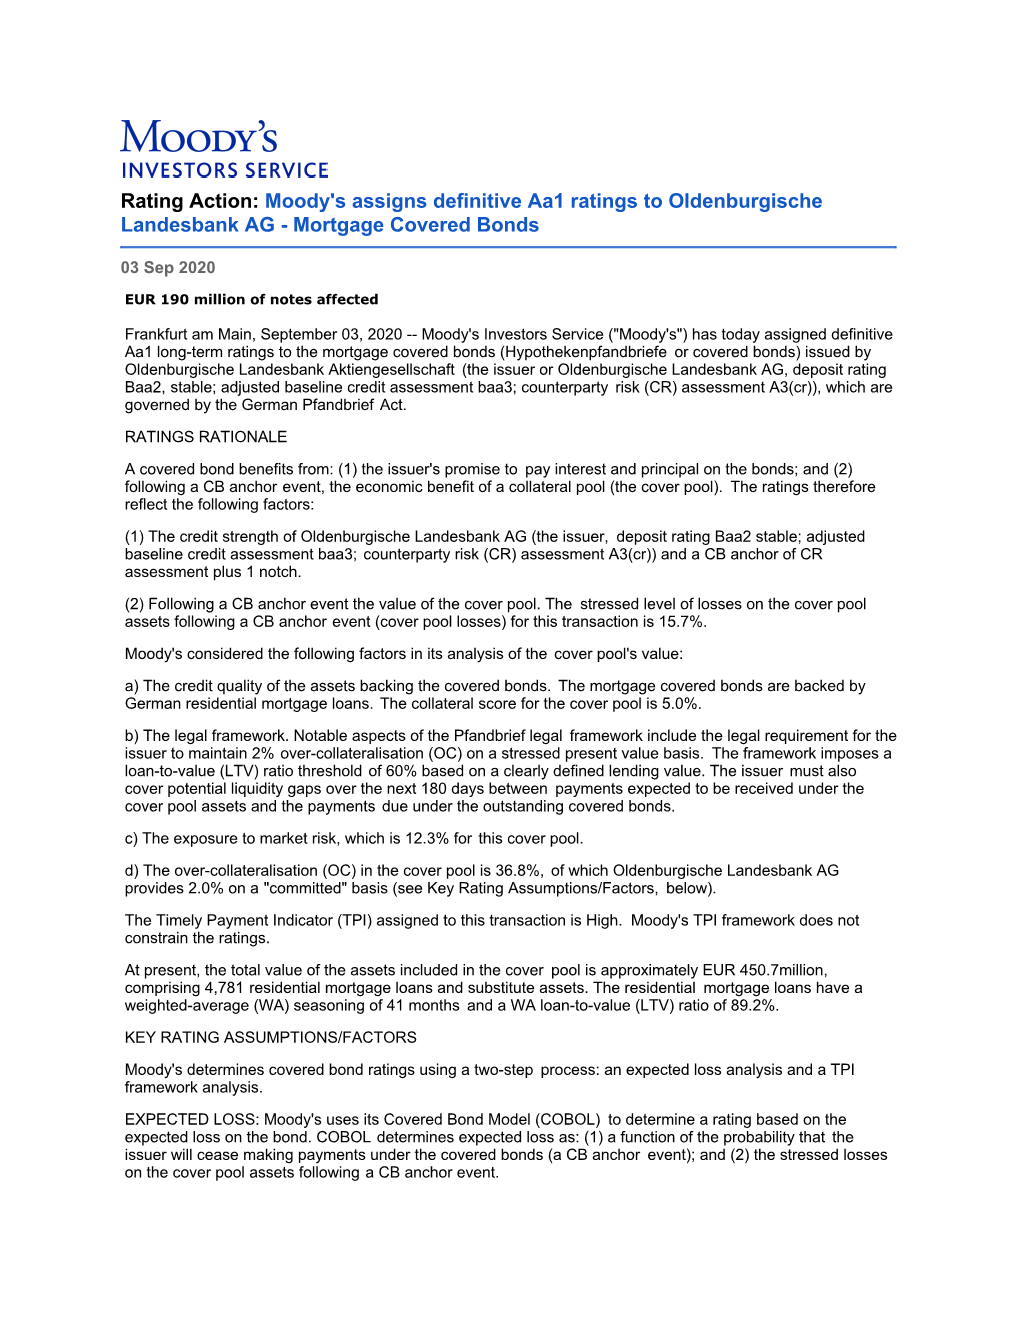 Moody's Assigns Definitive Aa1 Ratings to Oldenburgische Landesbank AG - Mortgage Covered Bonds